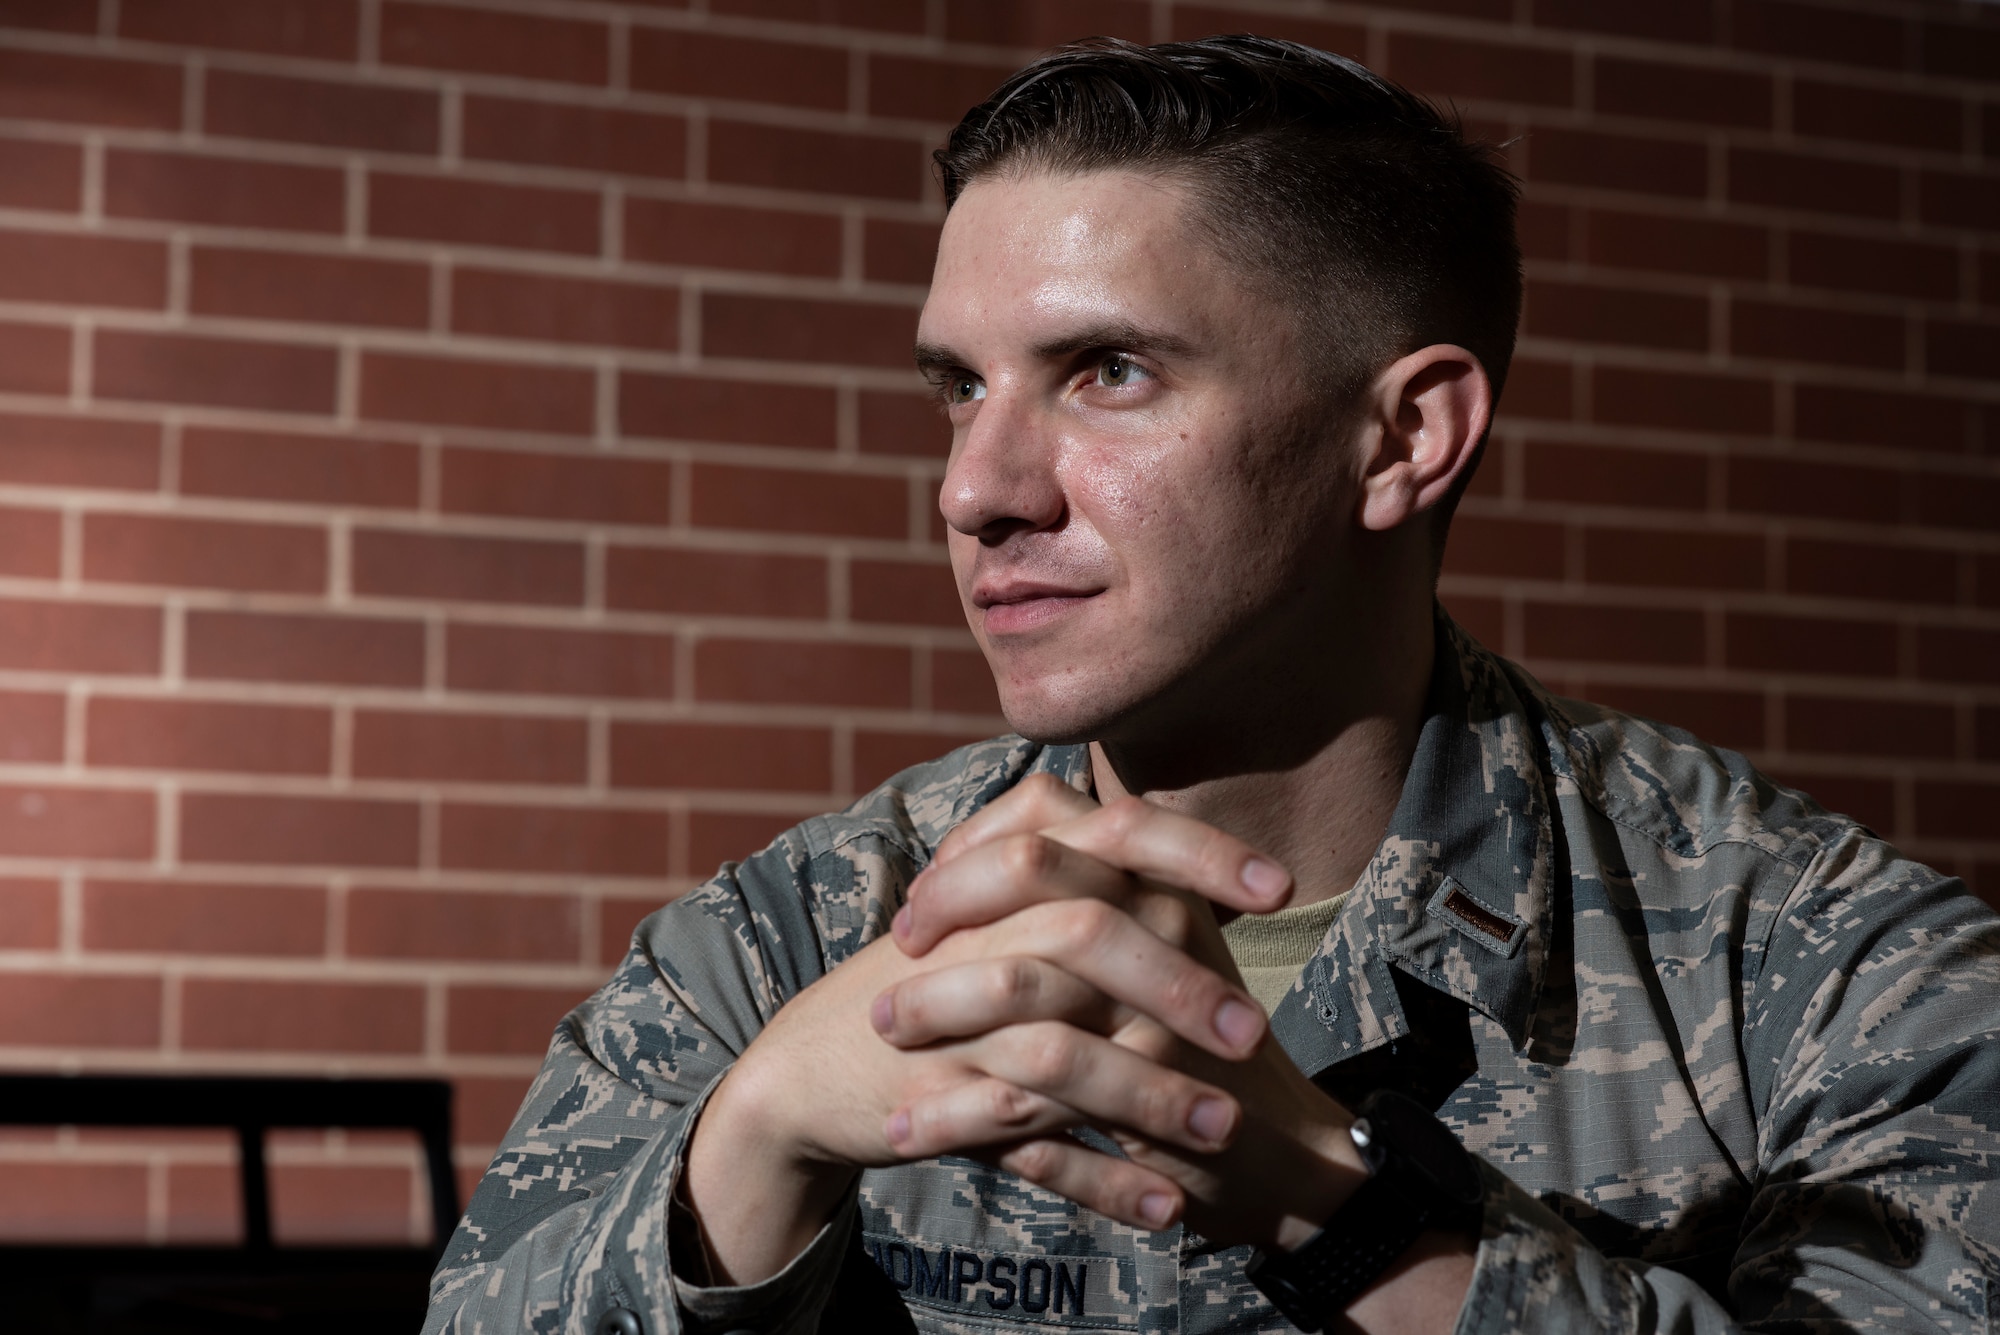 2nd Lt. Josh Thompson, 49th Wing Public Affairs officer, poses for a portrait, Jan. 25, 2019, at the Defense Information School on Fort George G. Meade, Md. Currently attending his public affairs training at DINFOS, Thompson continues to adapt to the daily changes that he is faced with in his new career as a PAO. (United States Air Force photo by Tech. Sgt. Maeson L. Elleman)